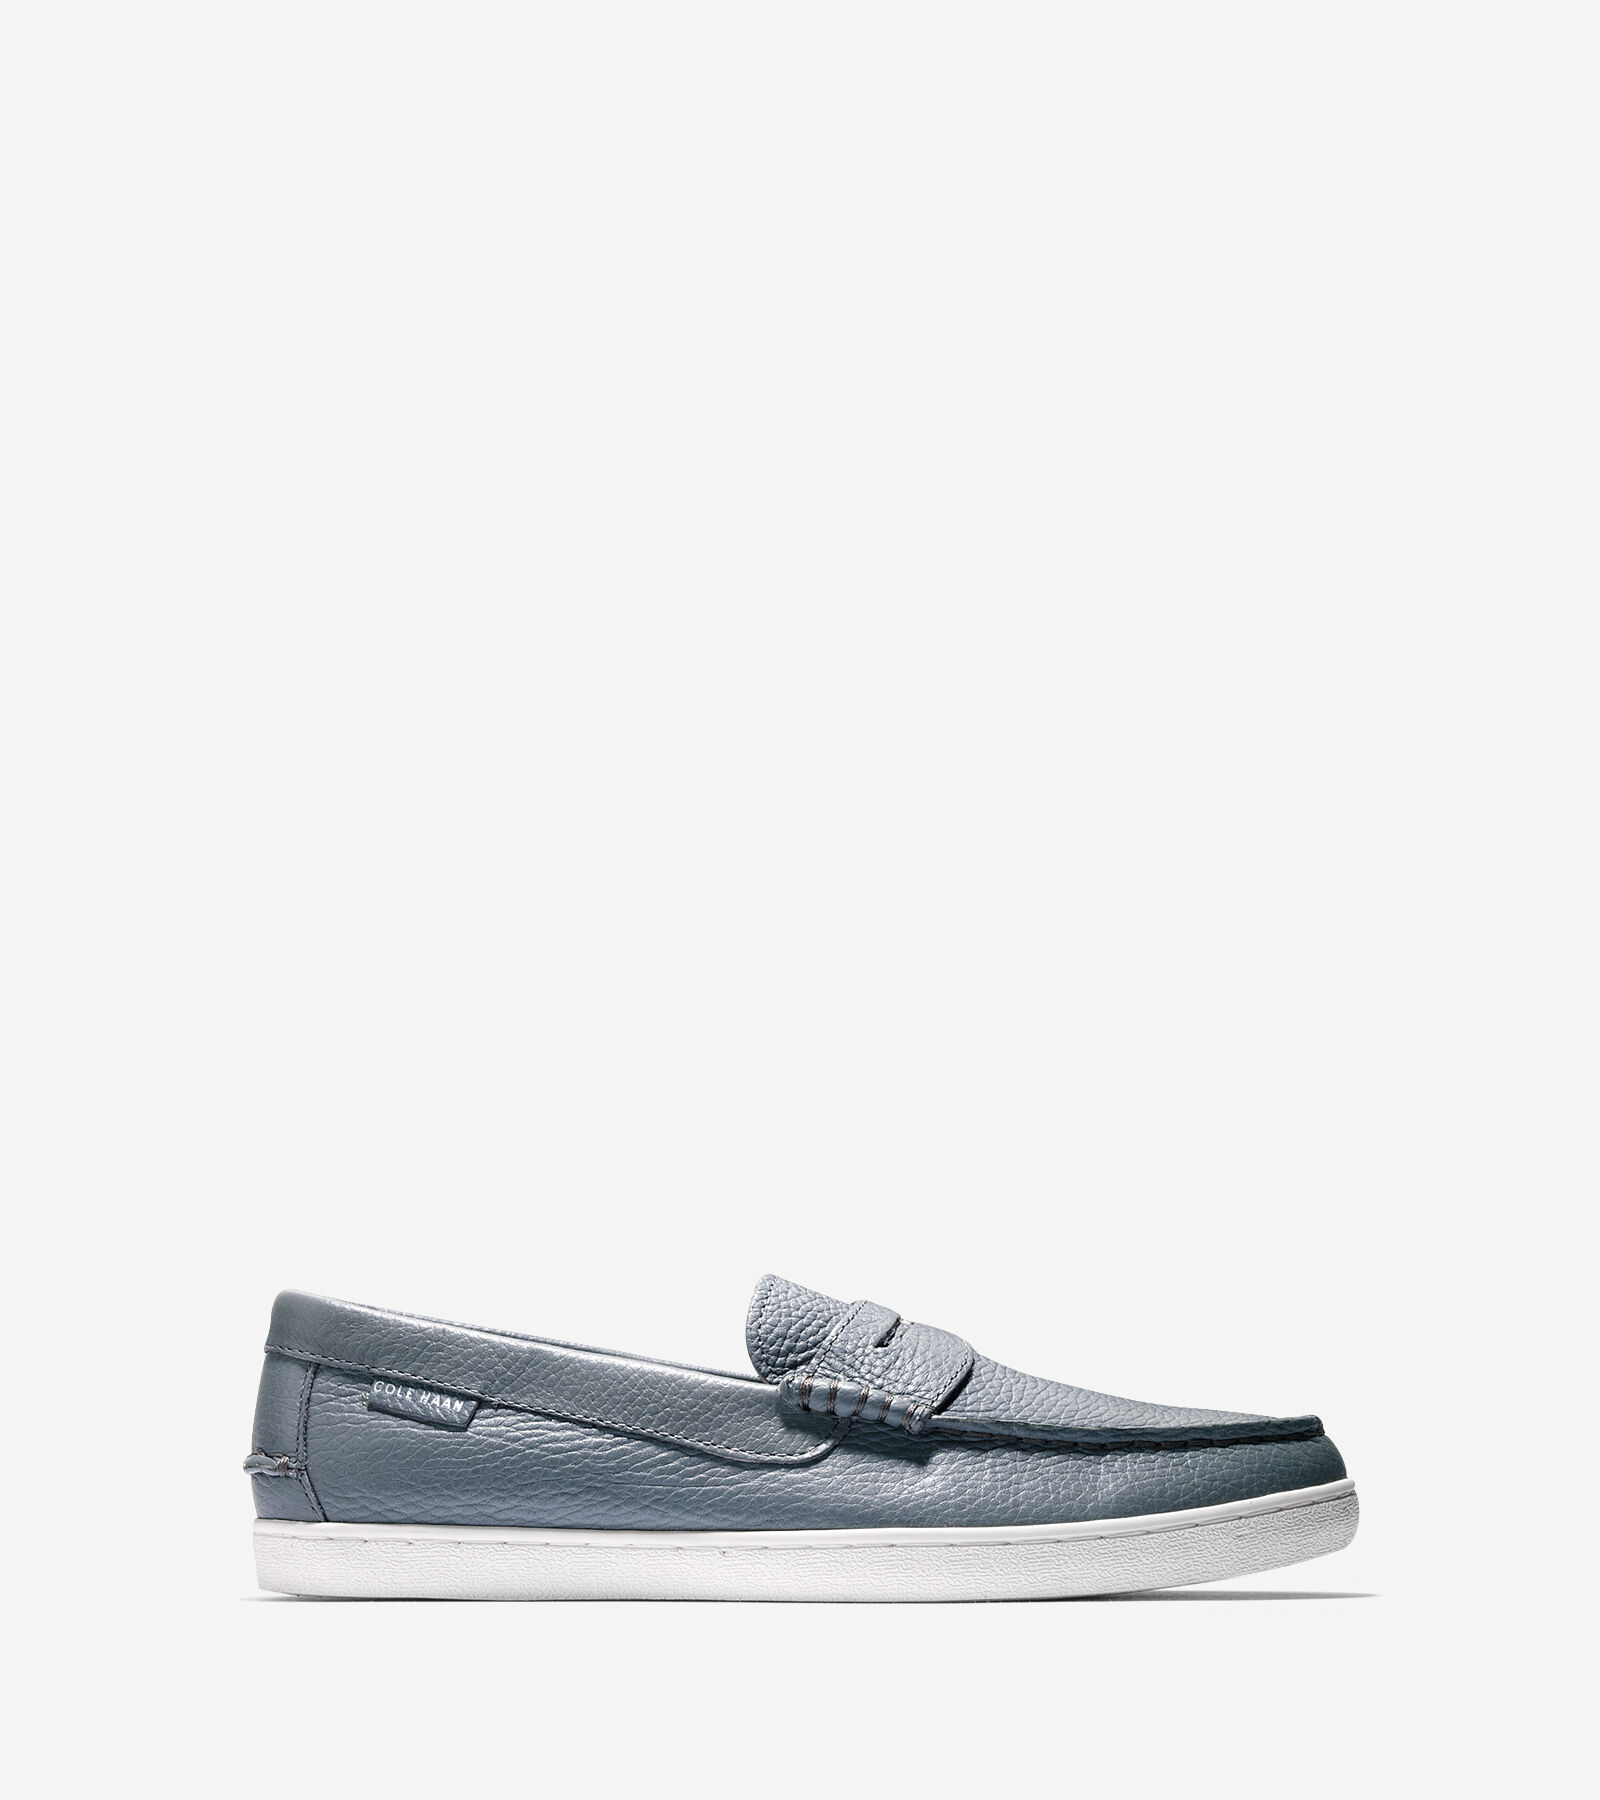 cole haan loafers sale